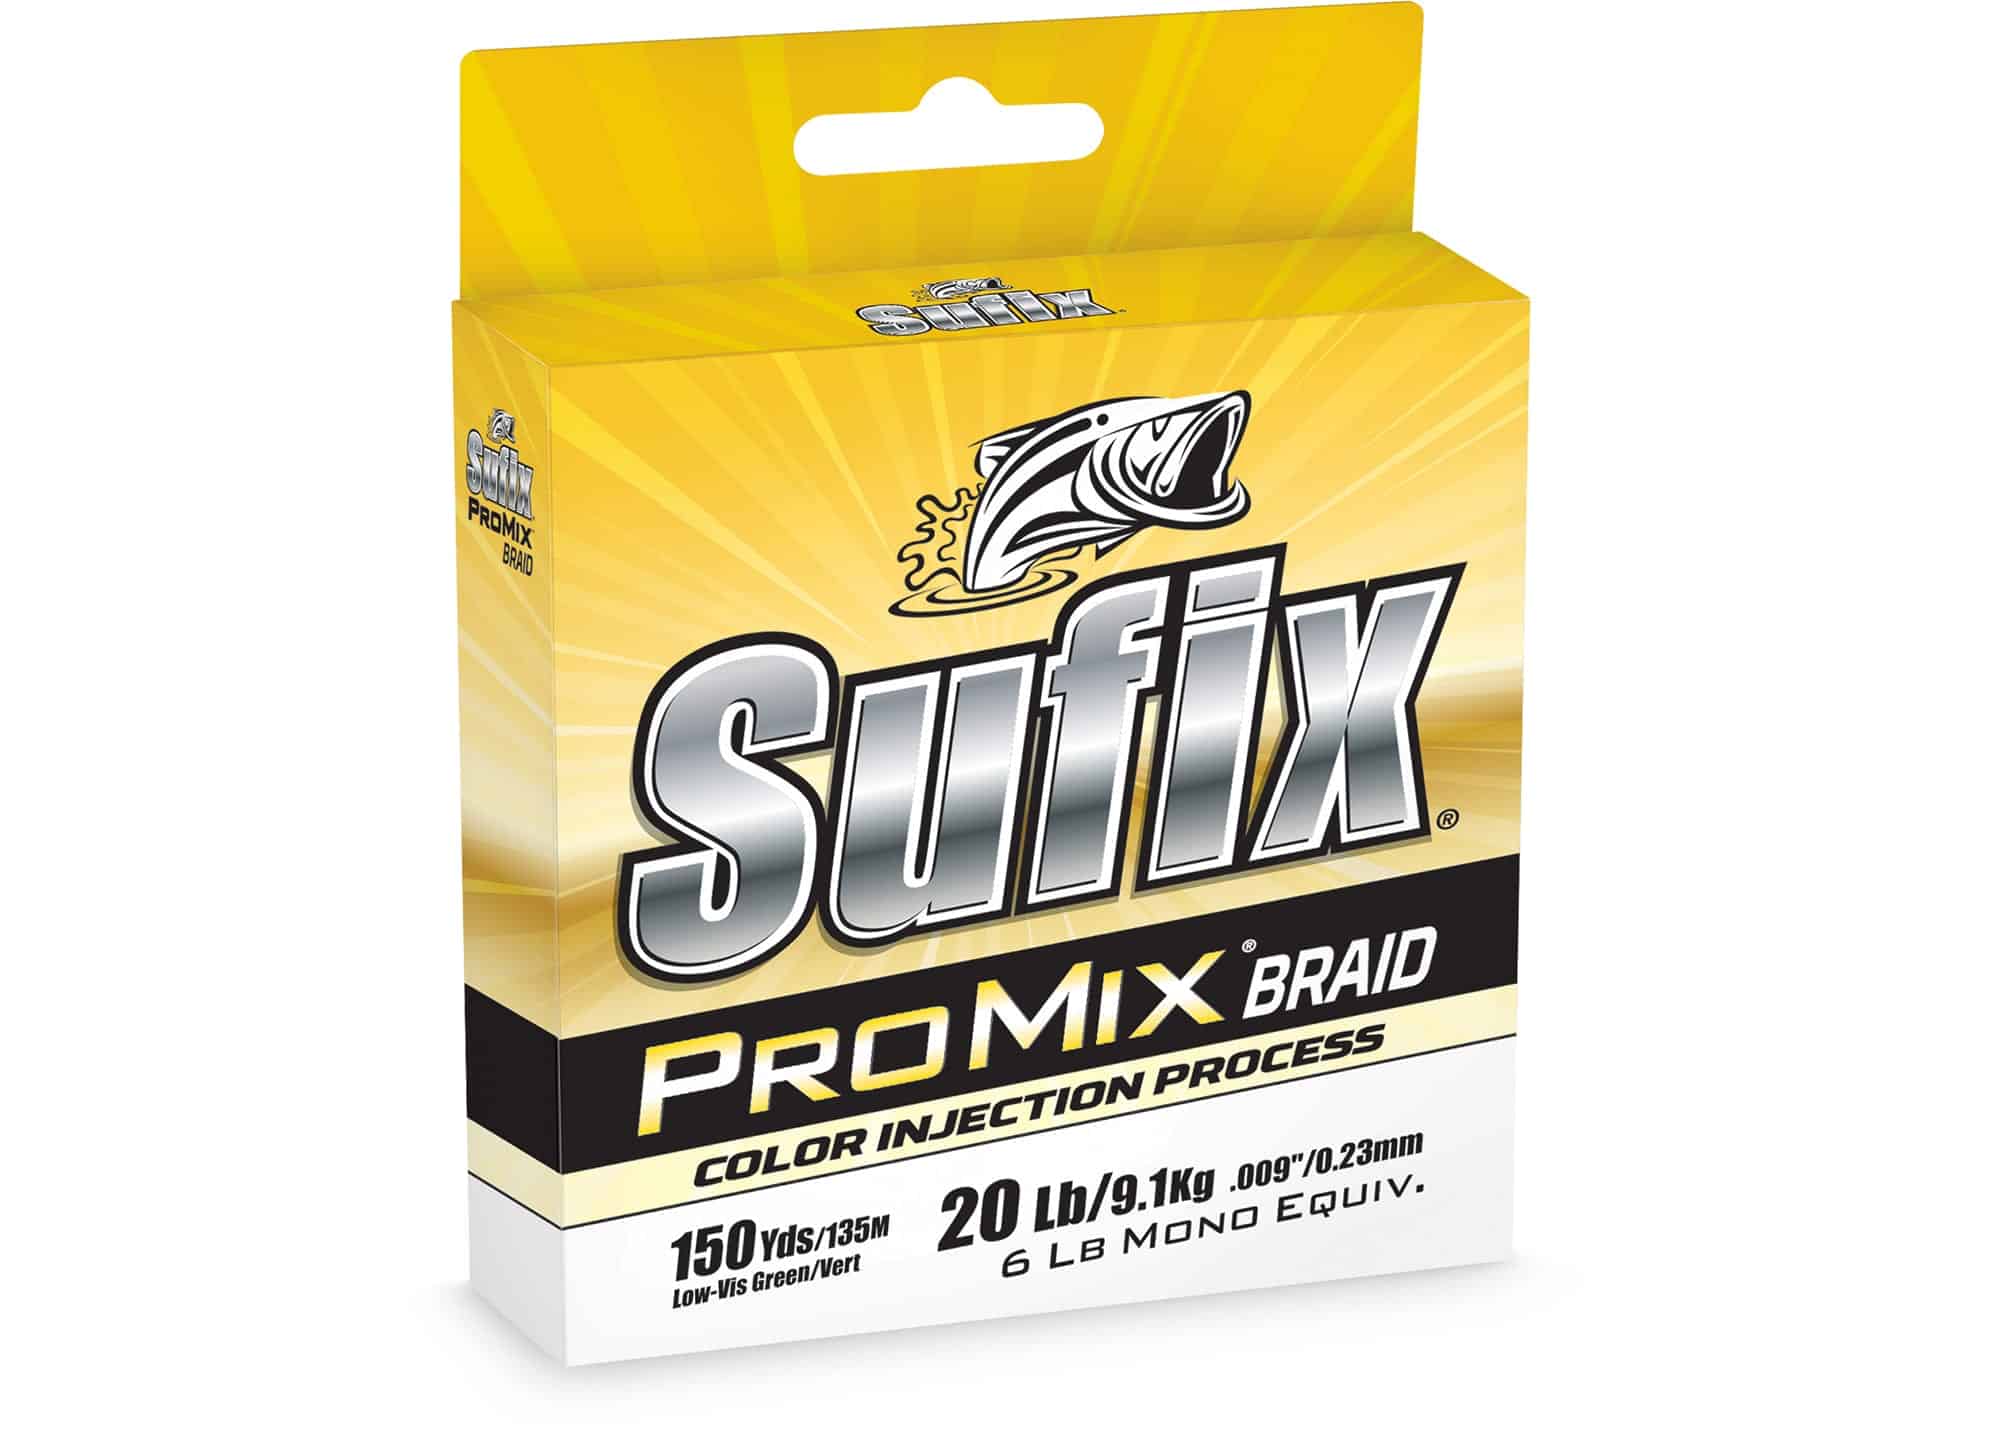 Sufix Performance Braid Fishing Line - 150 Yards and 20 Pound Test - Green